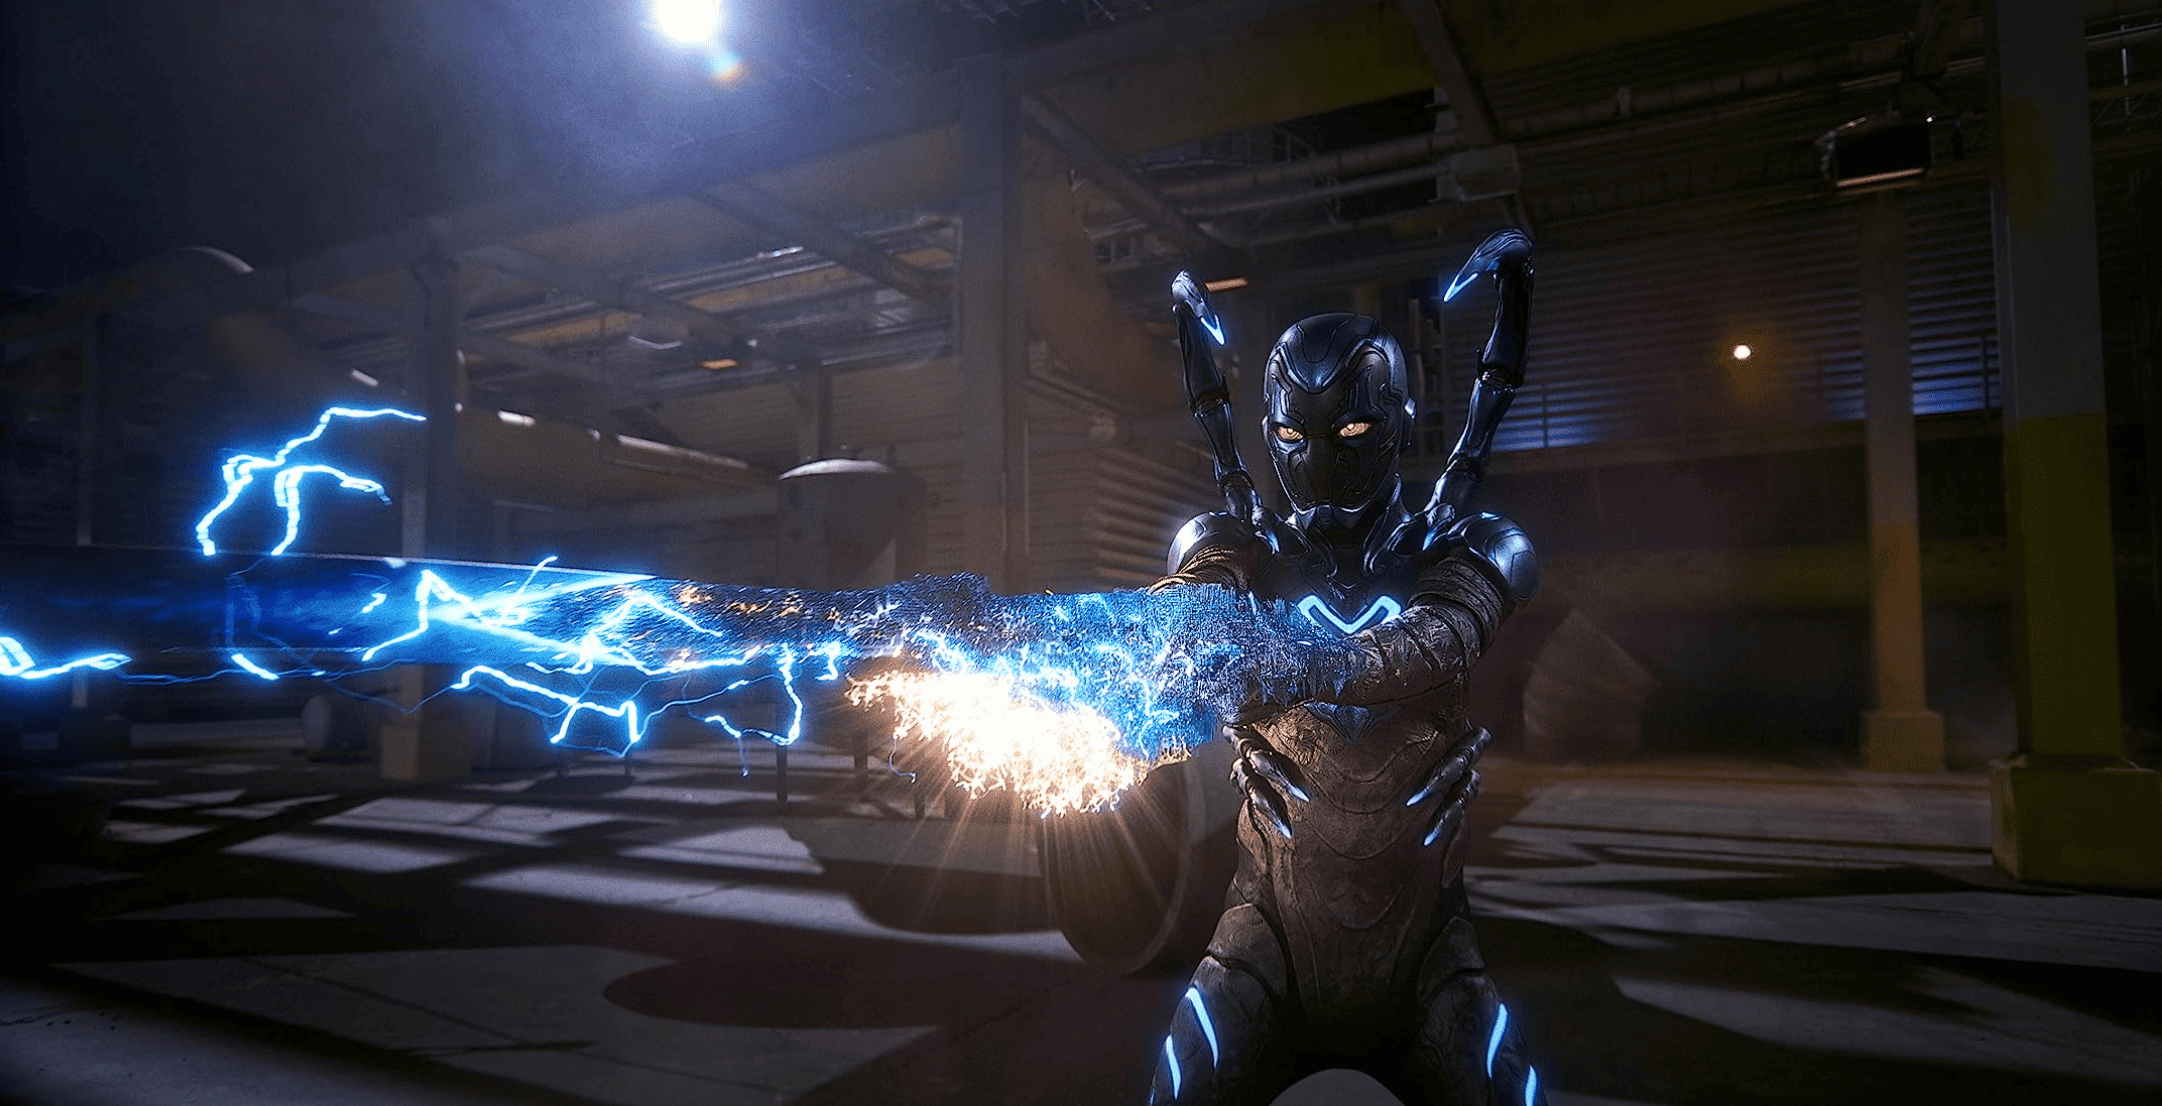 A suited-up man conjures an electrifying blue sword. (Image: DC Studios)